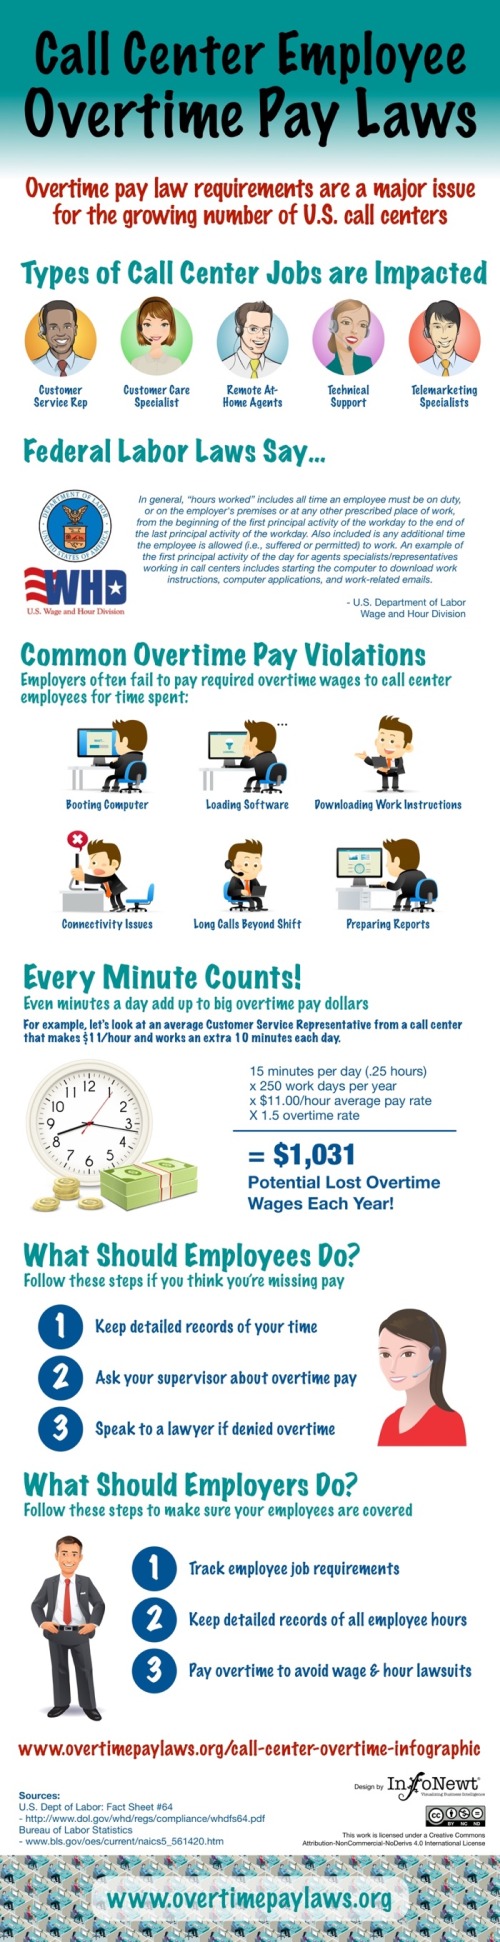 Call Center Employee Overtime Pay Laws infographic